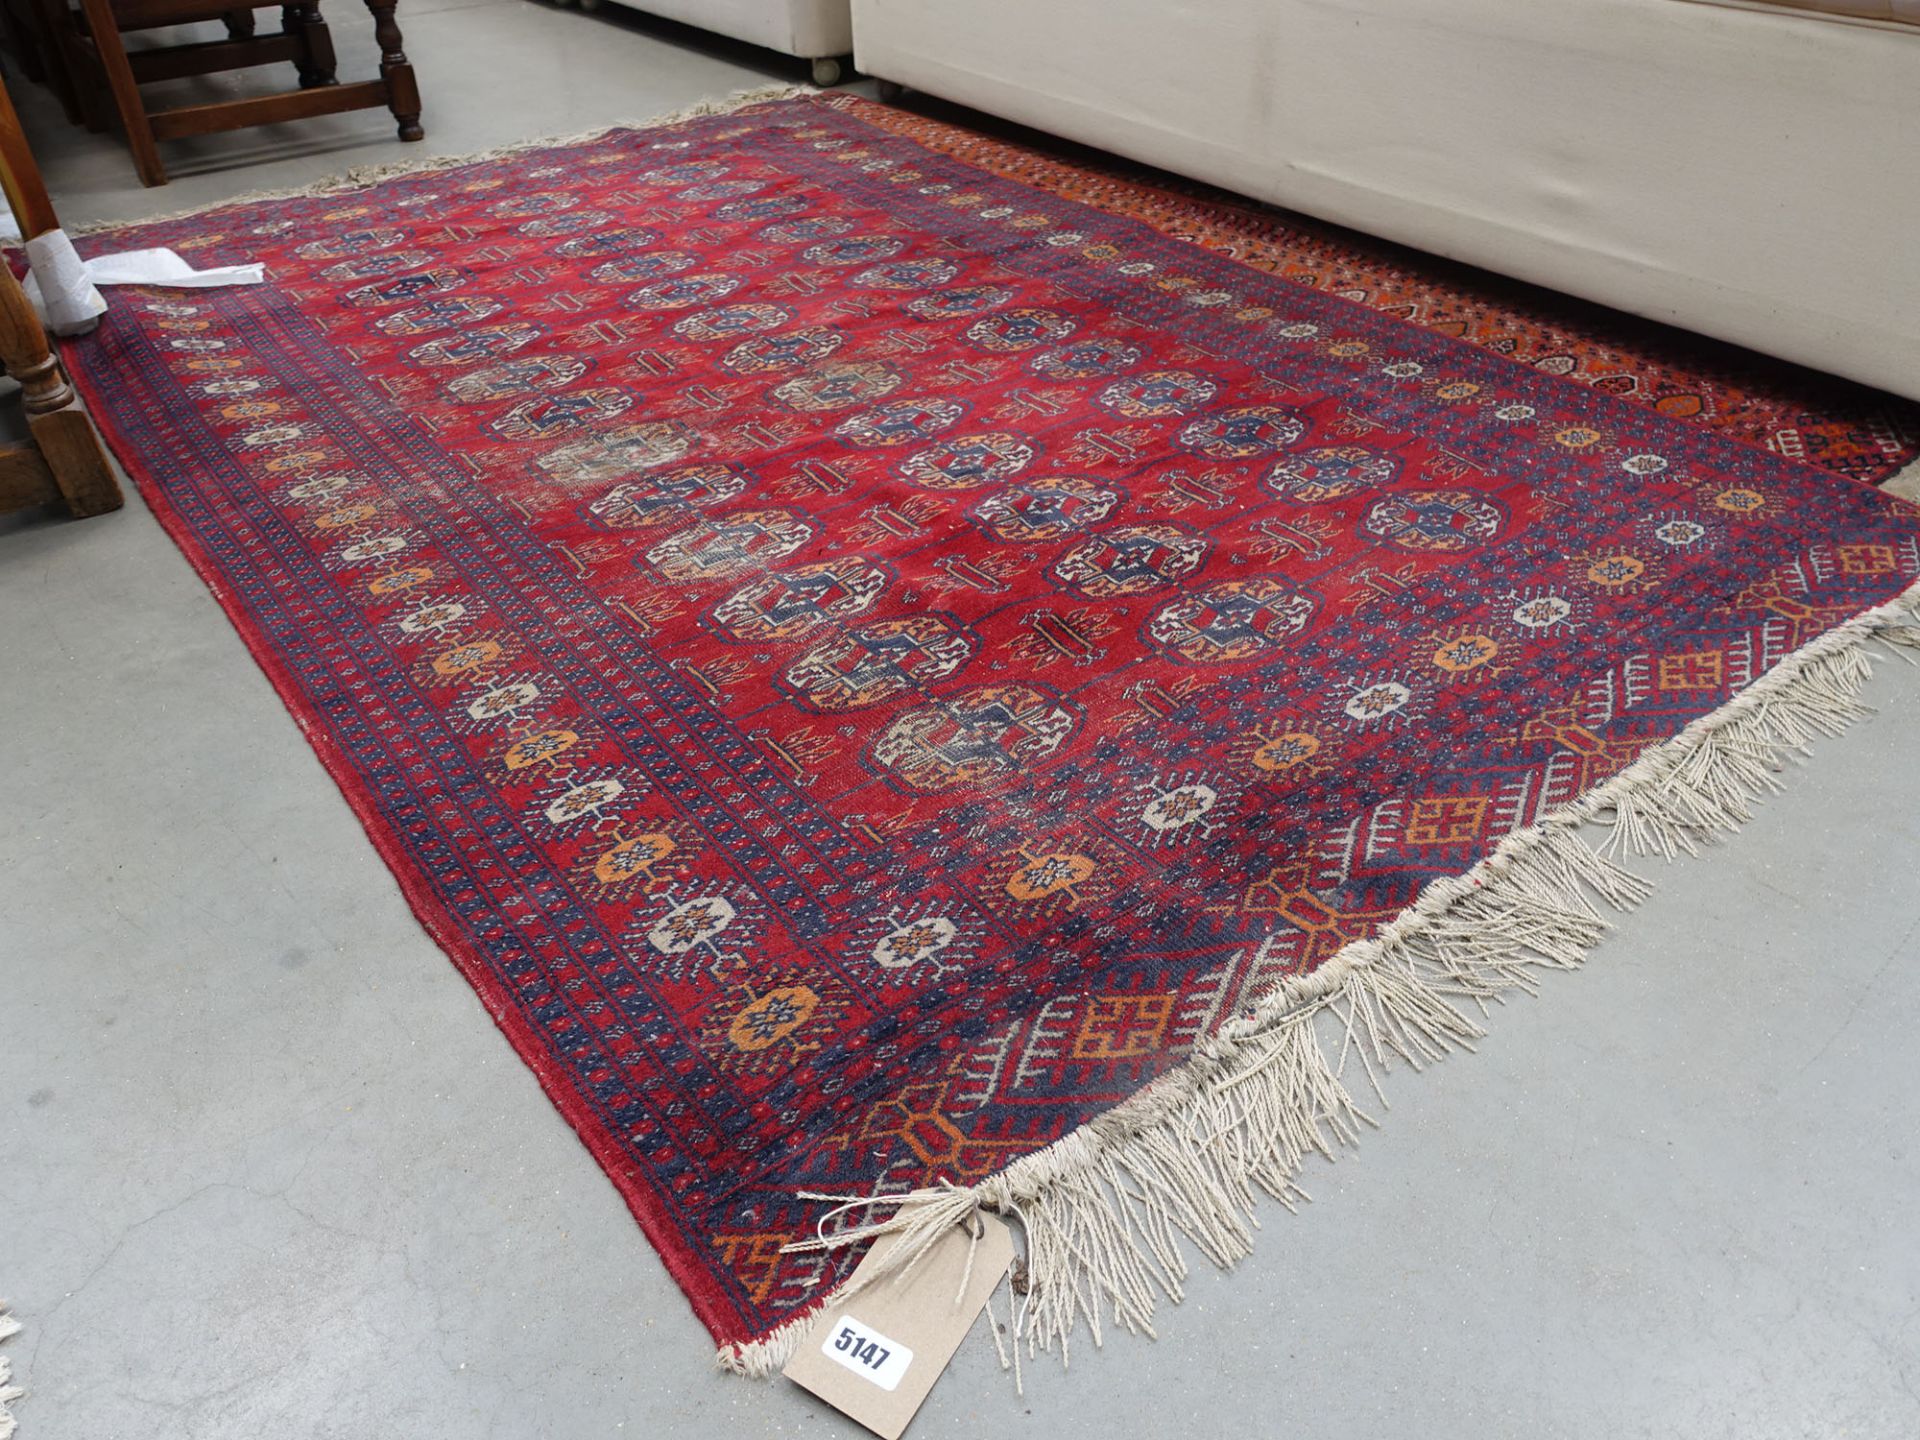 2 Bokhara rugs in red